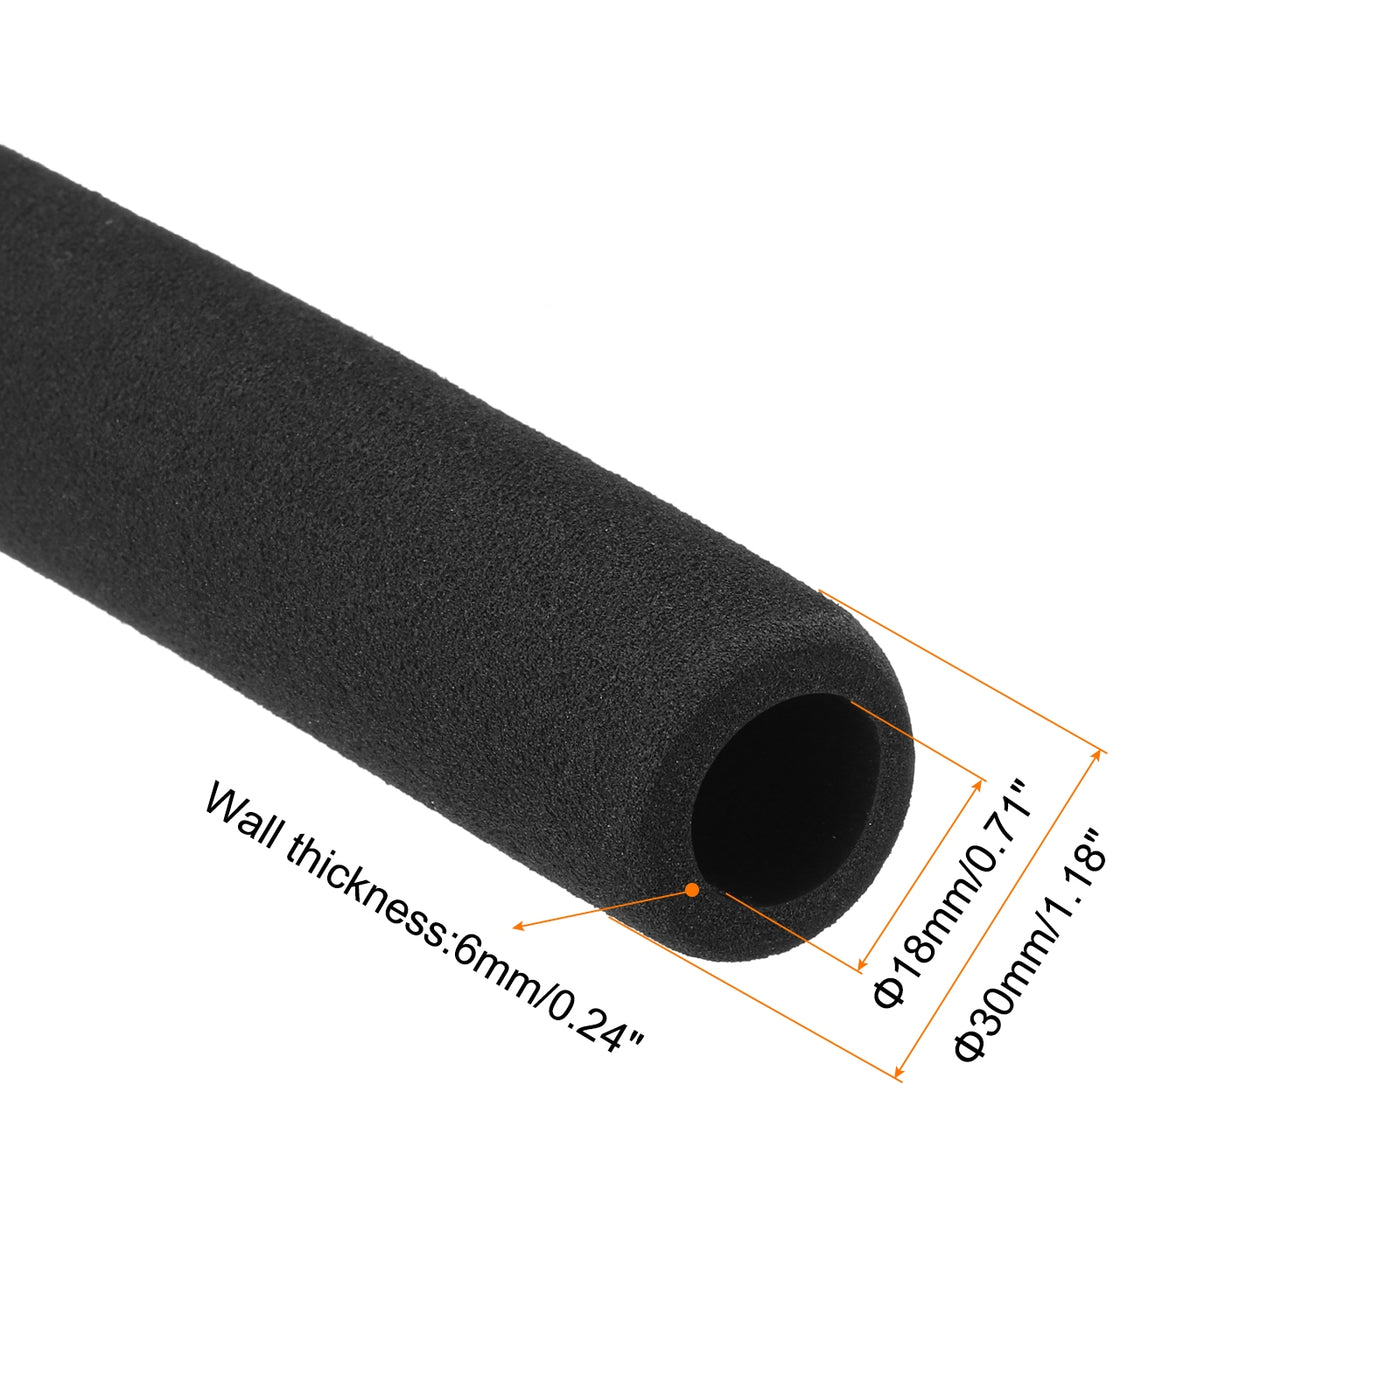 uxcell Uxcell Pipe Insulation Tube Foam Tubing for Handle Grip Support 18mm ID 30mm OD 485mm Heat Preservation Black